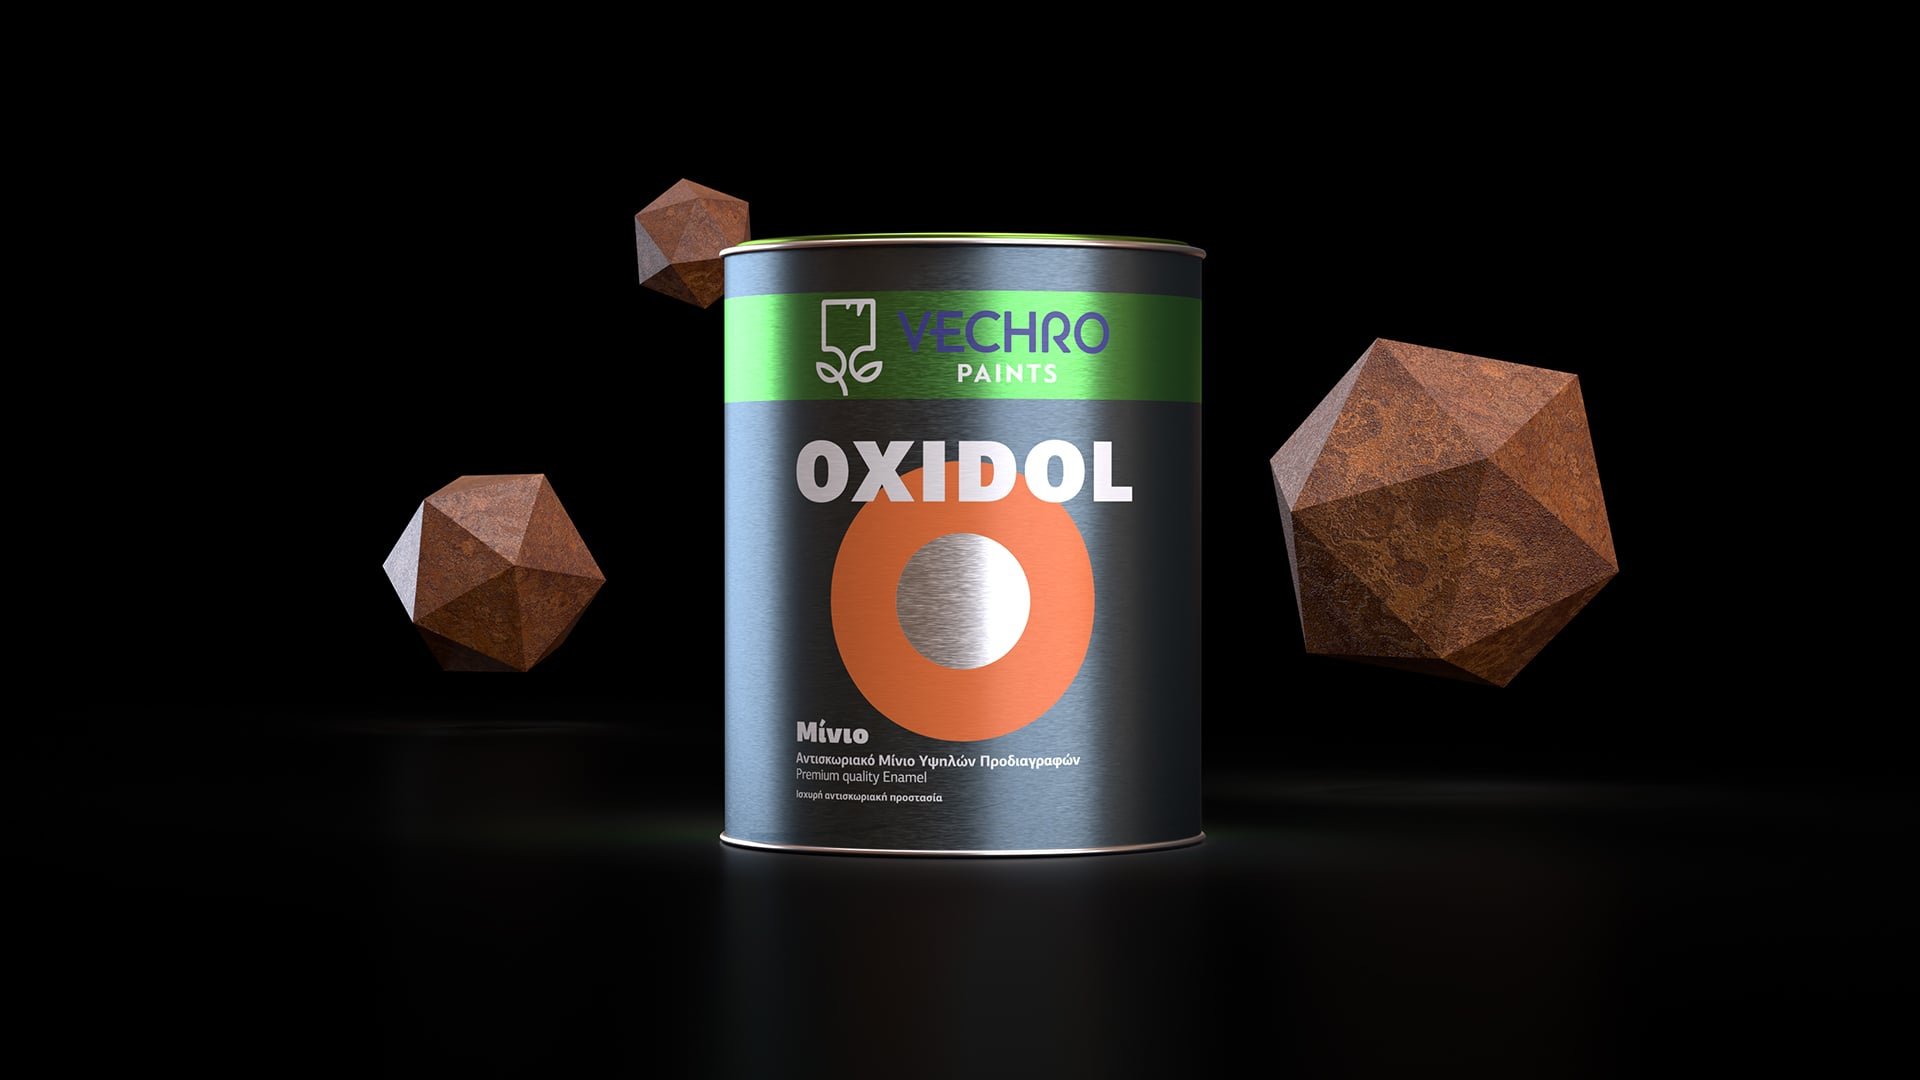 Vechro Oxidol paint can rebranded in black background